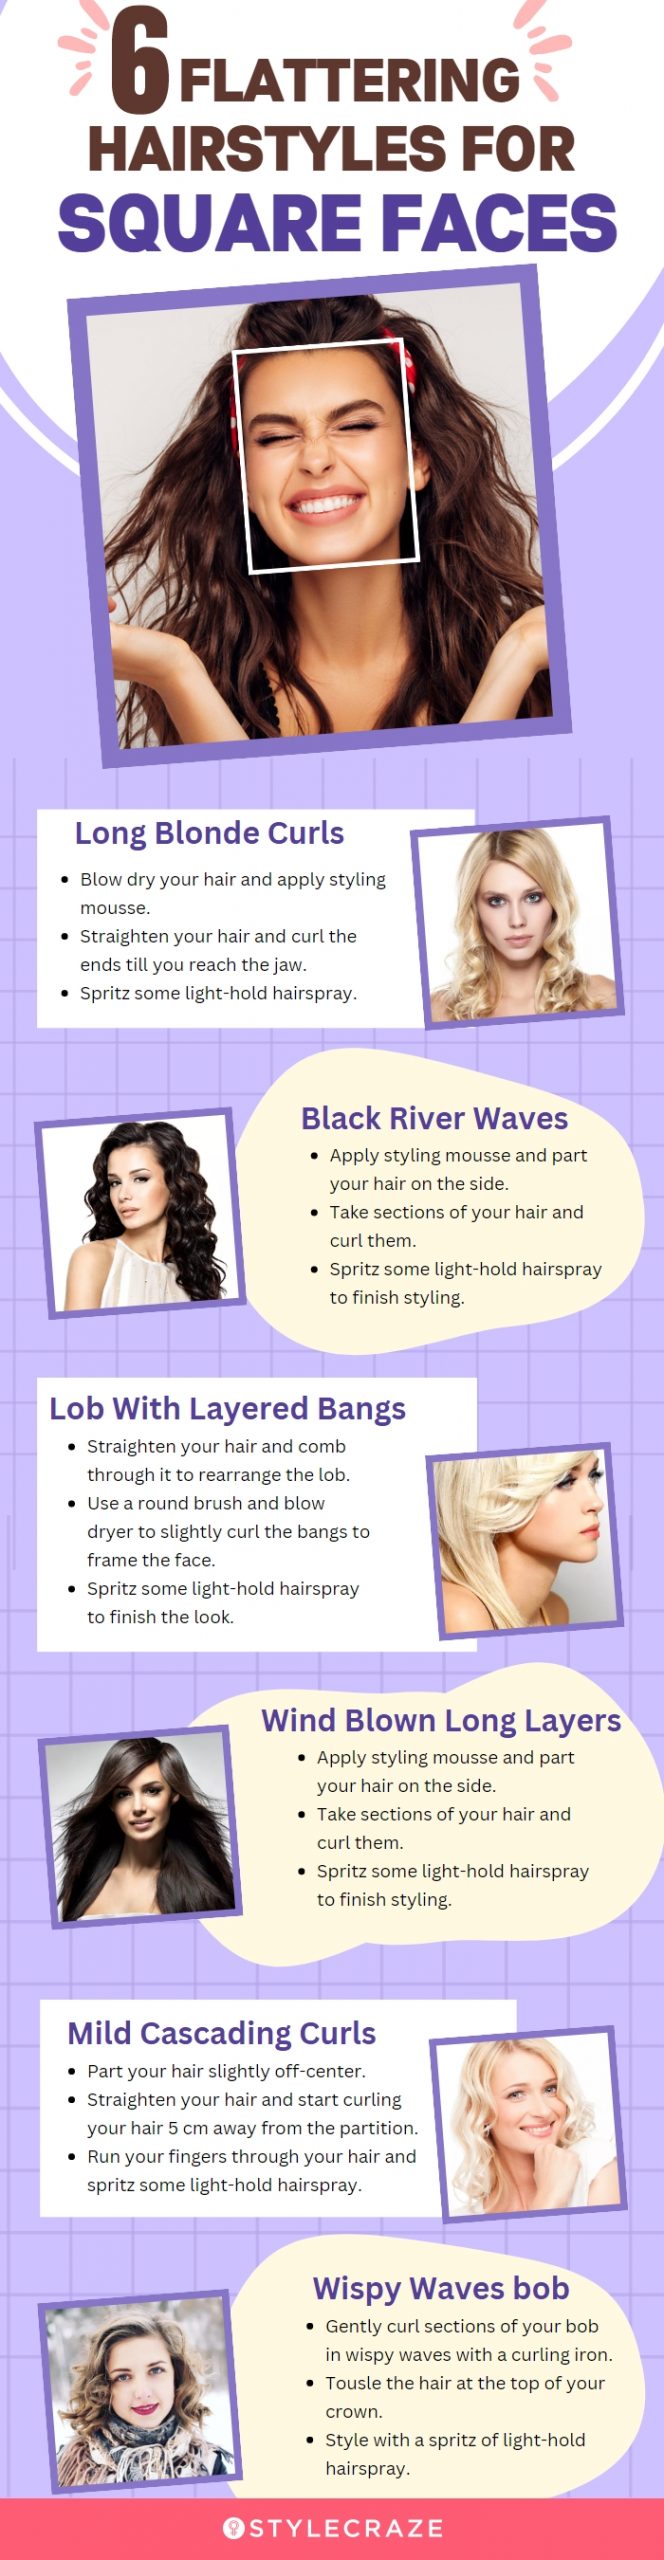 6 flattering hairstyles for square faces (infographic)